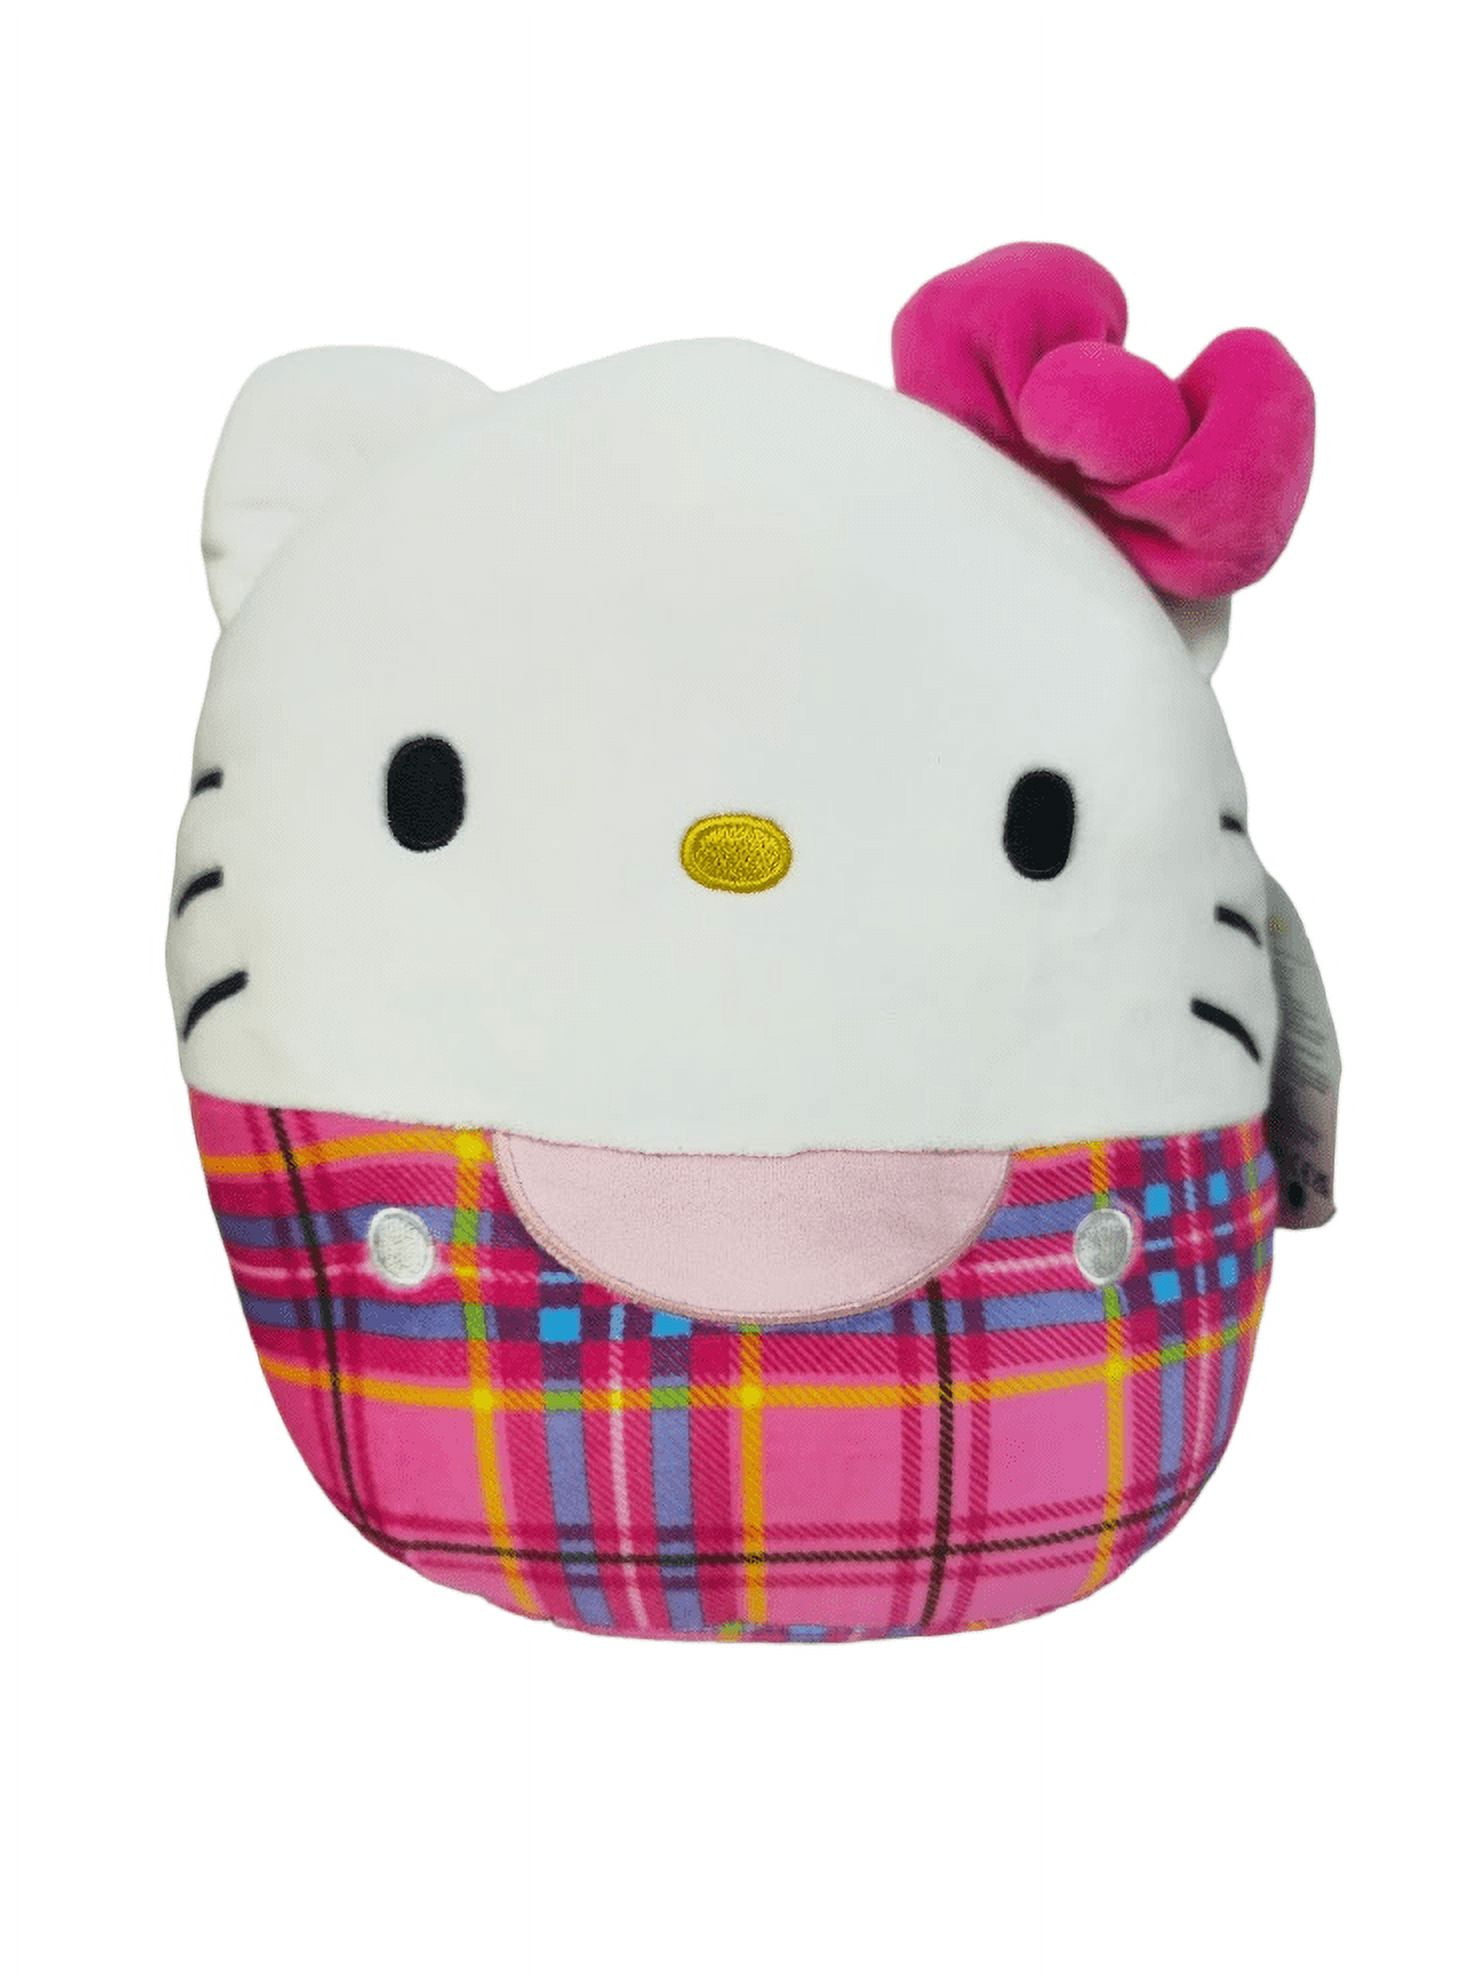 Squishmallow Official Kellytoys 10 Inch Hello Kitty Wearing Pink Plaid  Shirt and Bow Fall Halloween Edition Ultimate Soft Plush Stuffed Toy